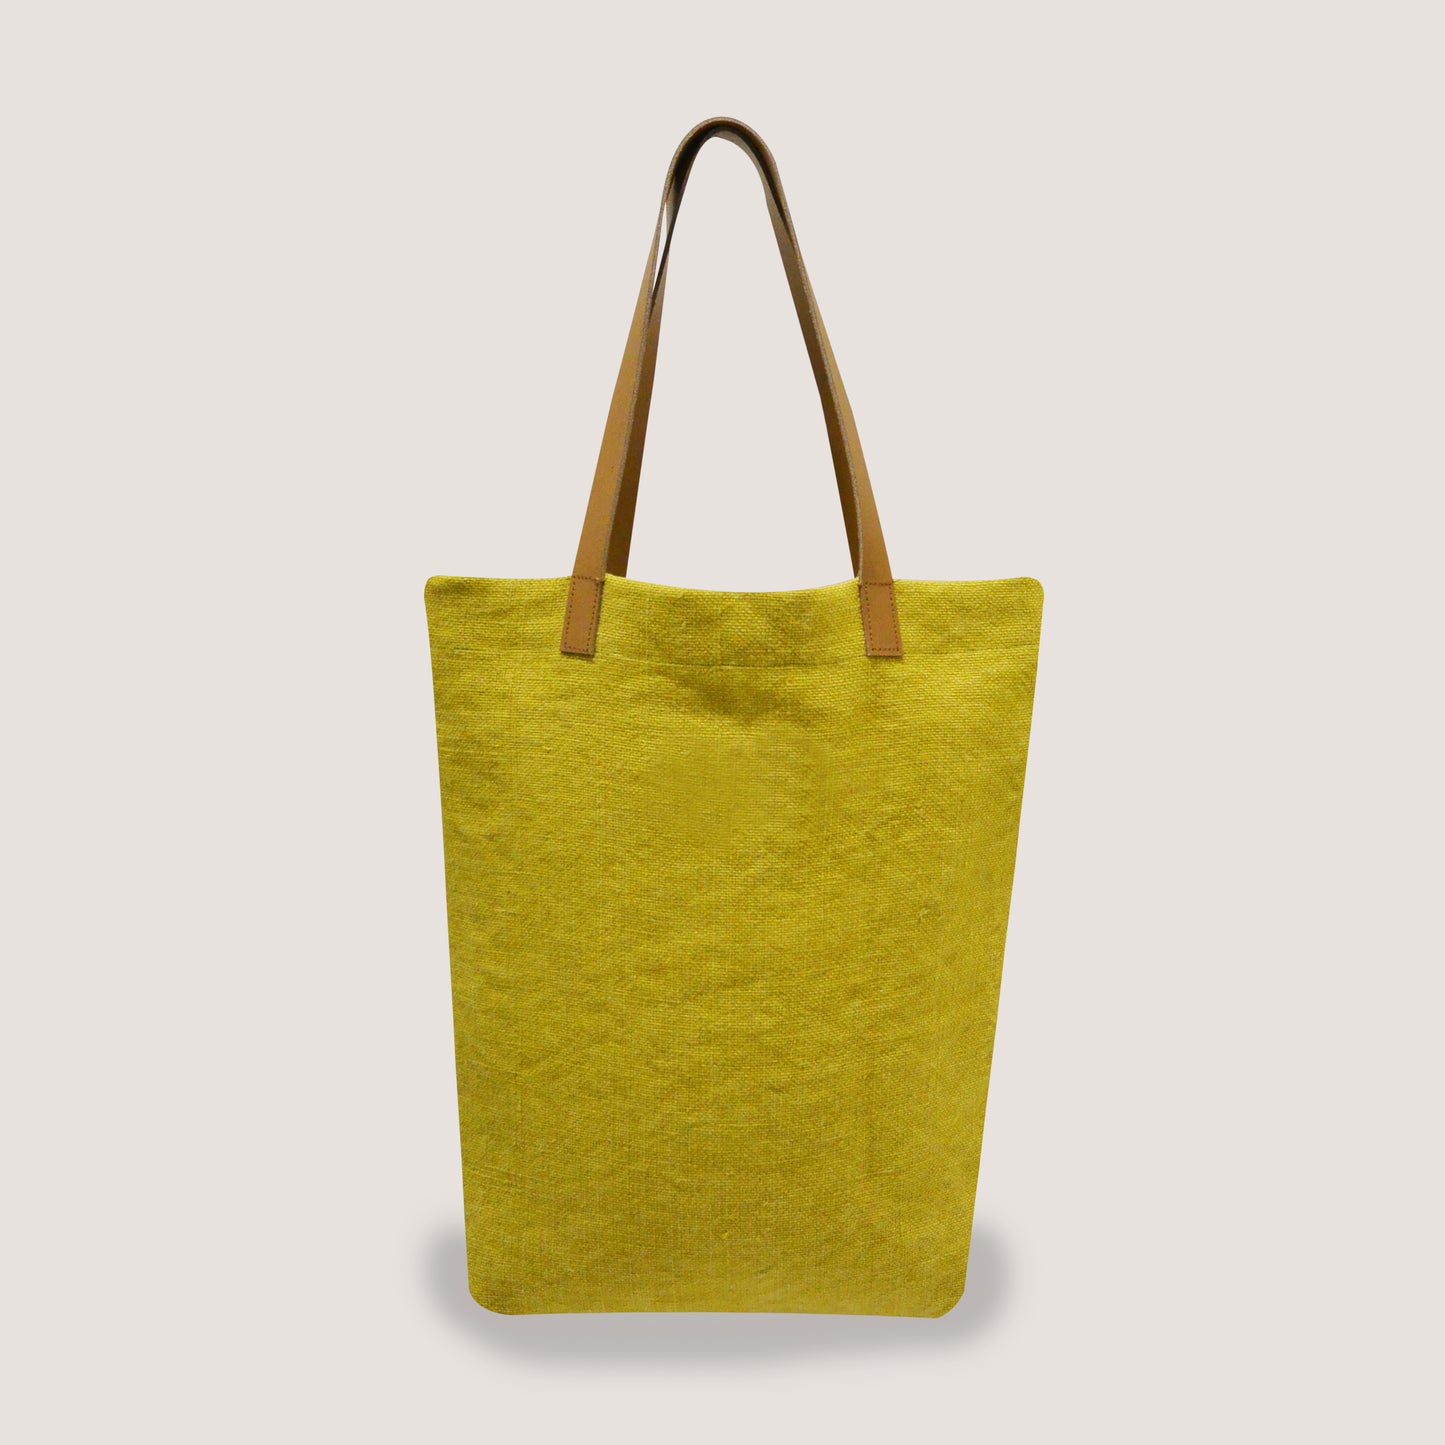 EARTHBAGS WASHED JUTE CANVAS TOTE BAGS